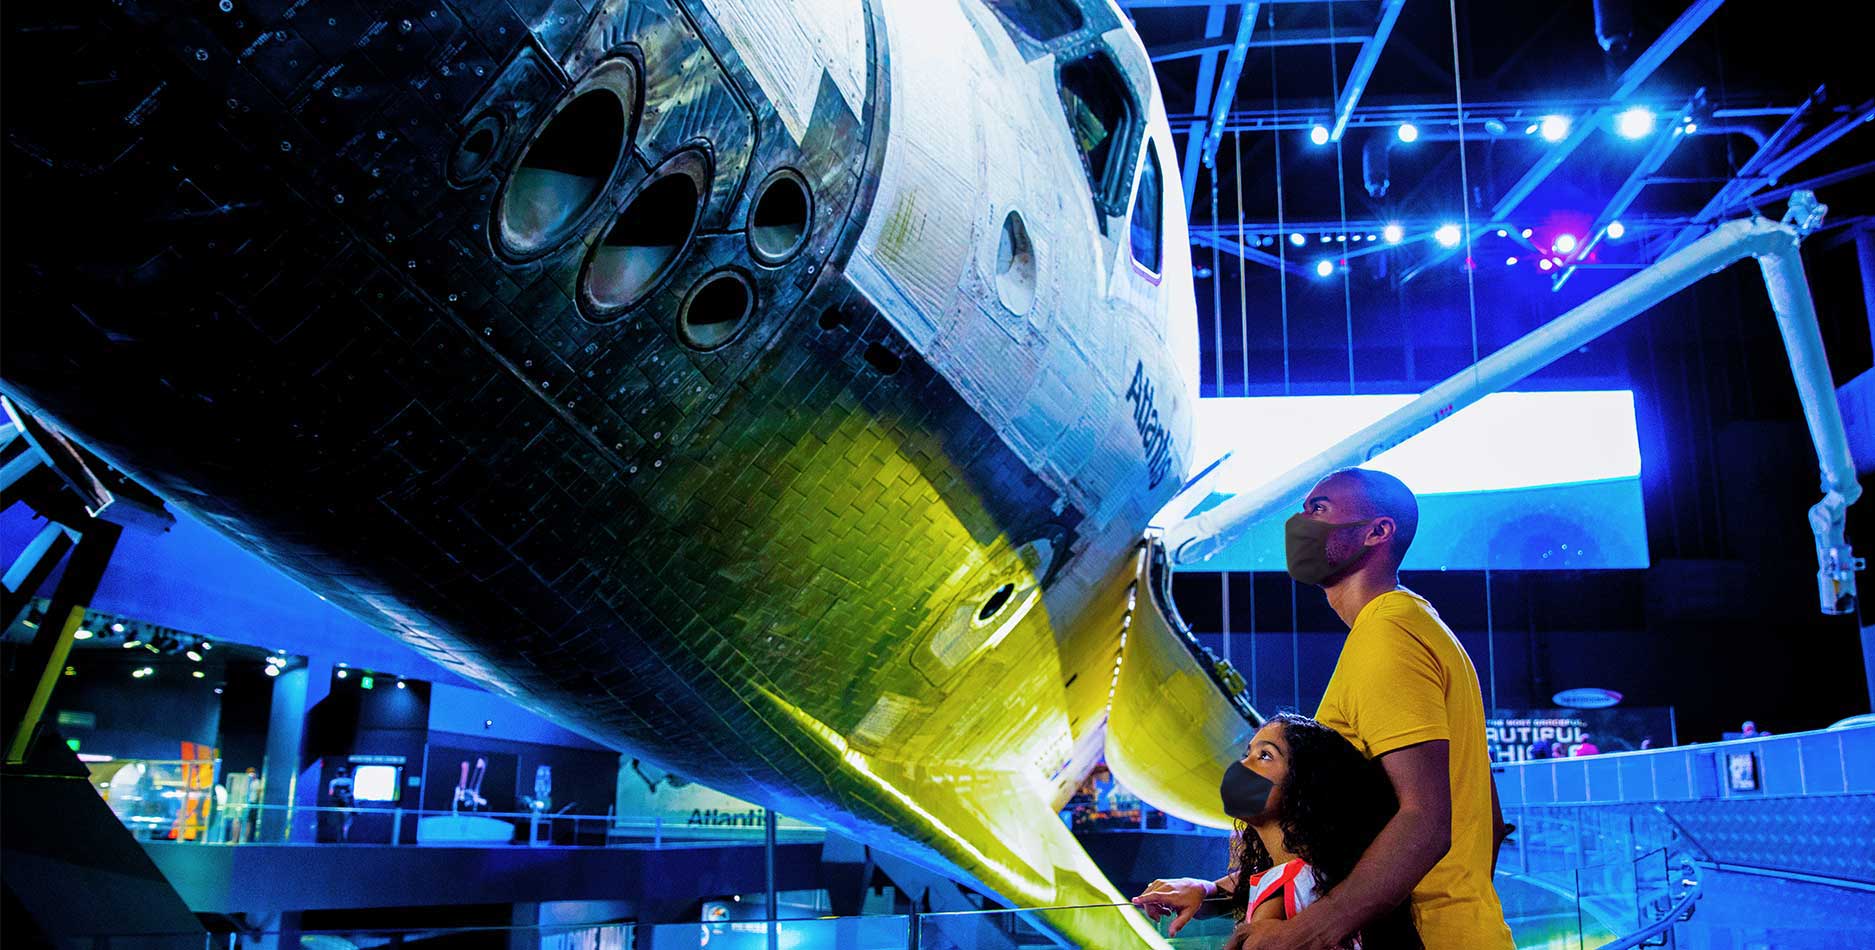 Father and daughter look up at space shuttle Atlantis